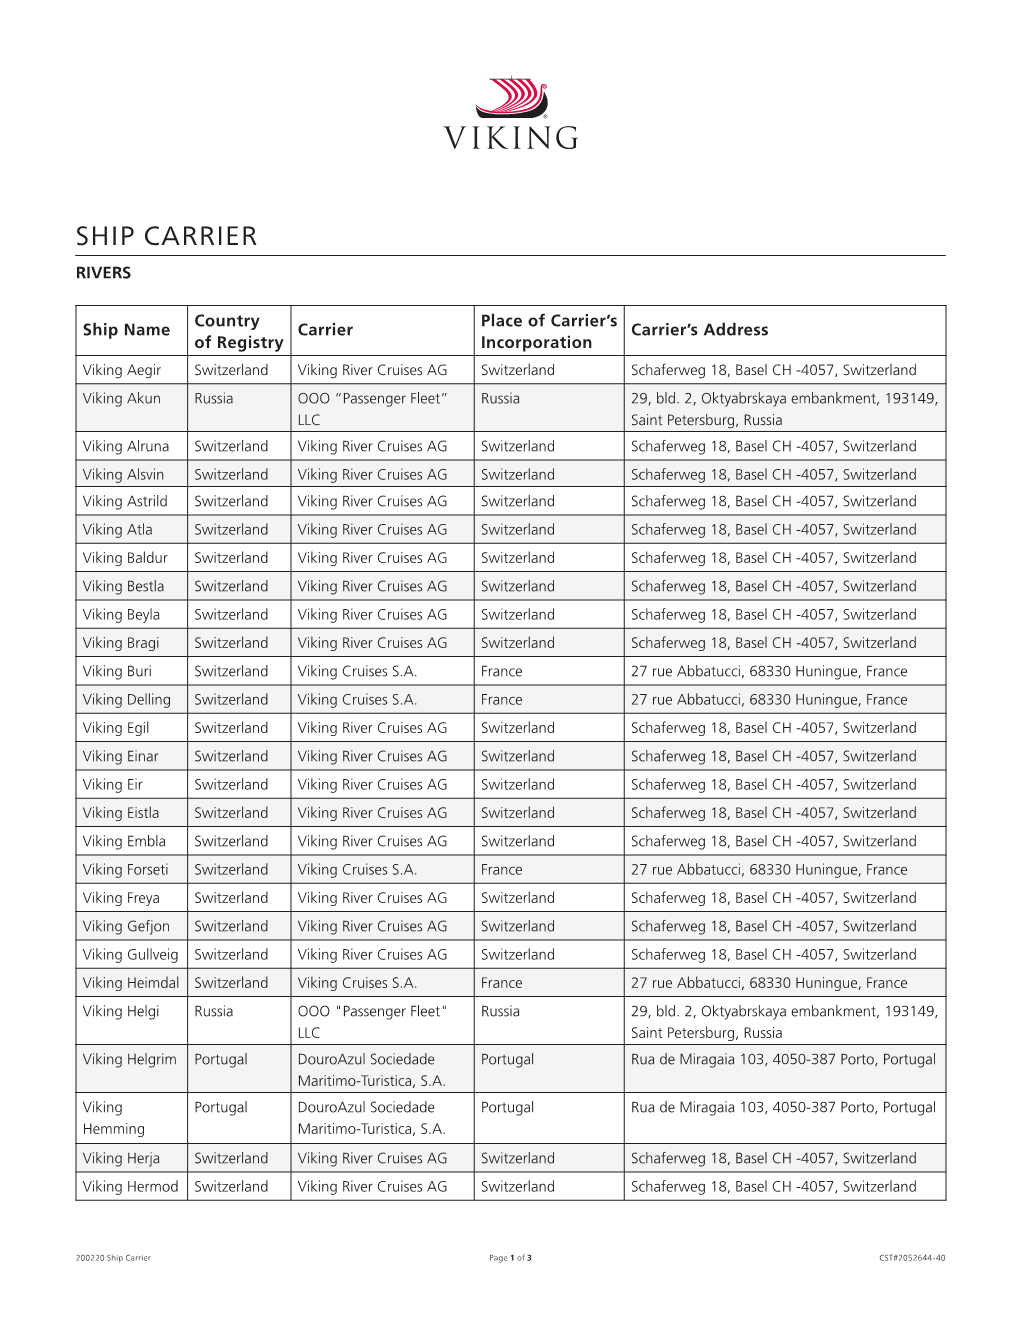 Ship Carrier Rivers